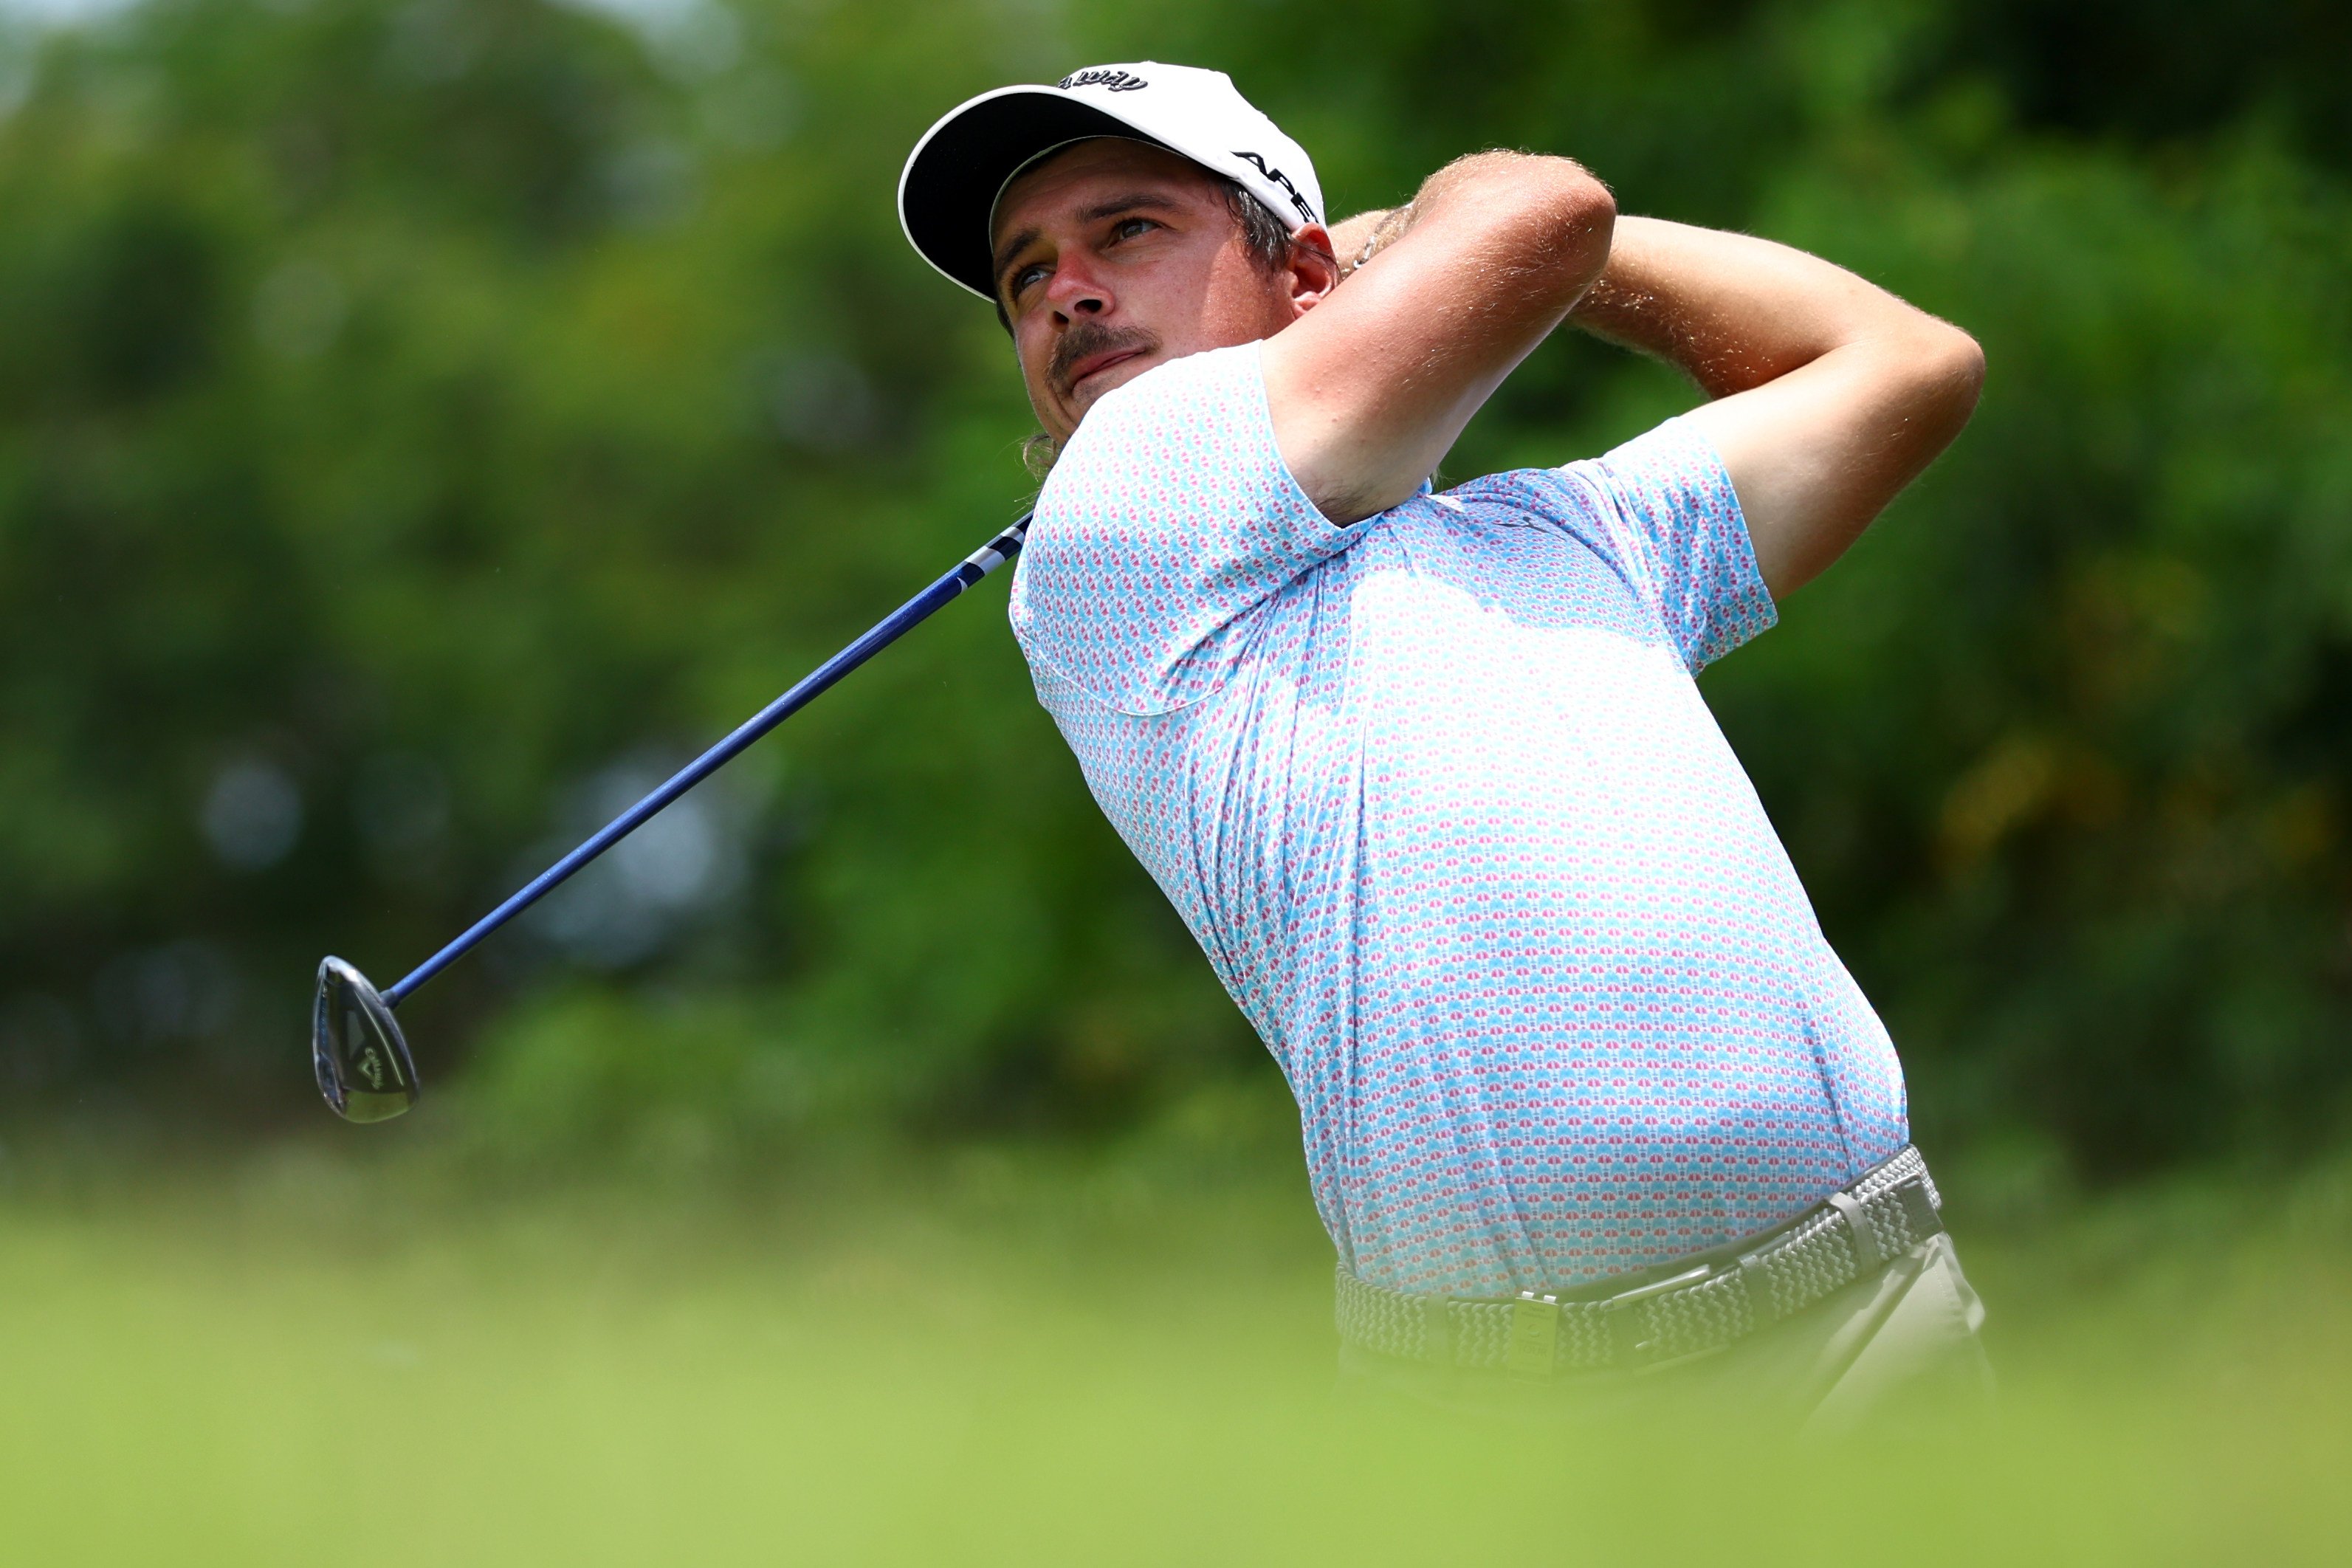 David Micheluzzi tees off on 15 during the third round of the Porsche Singapore Classic. Photo: Getty Images